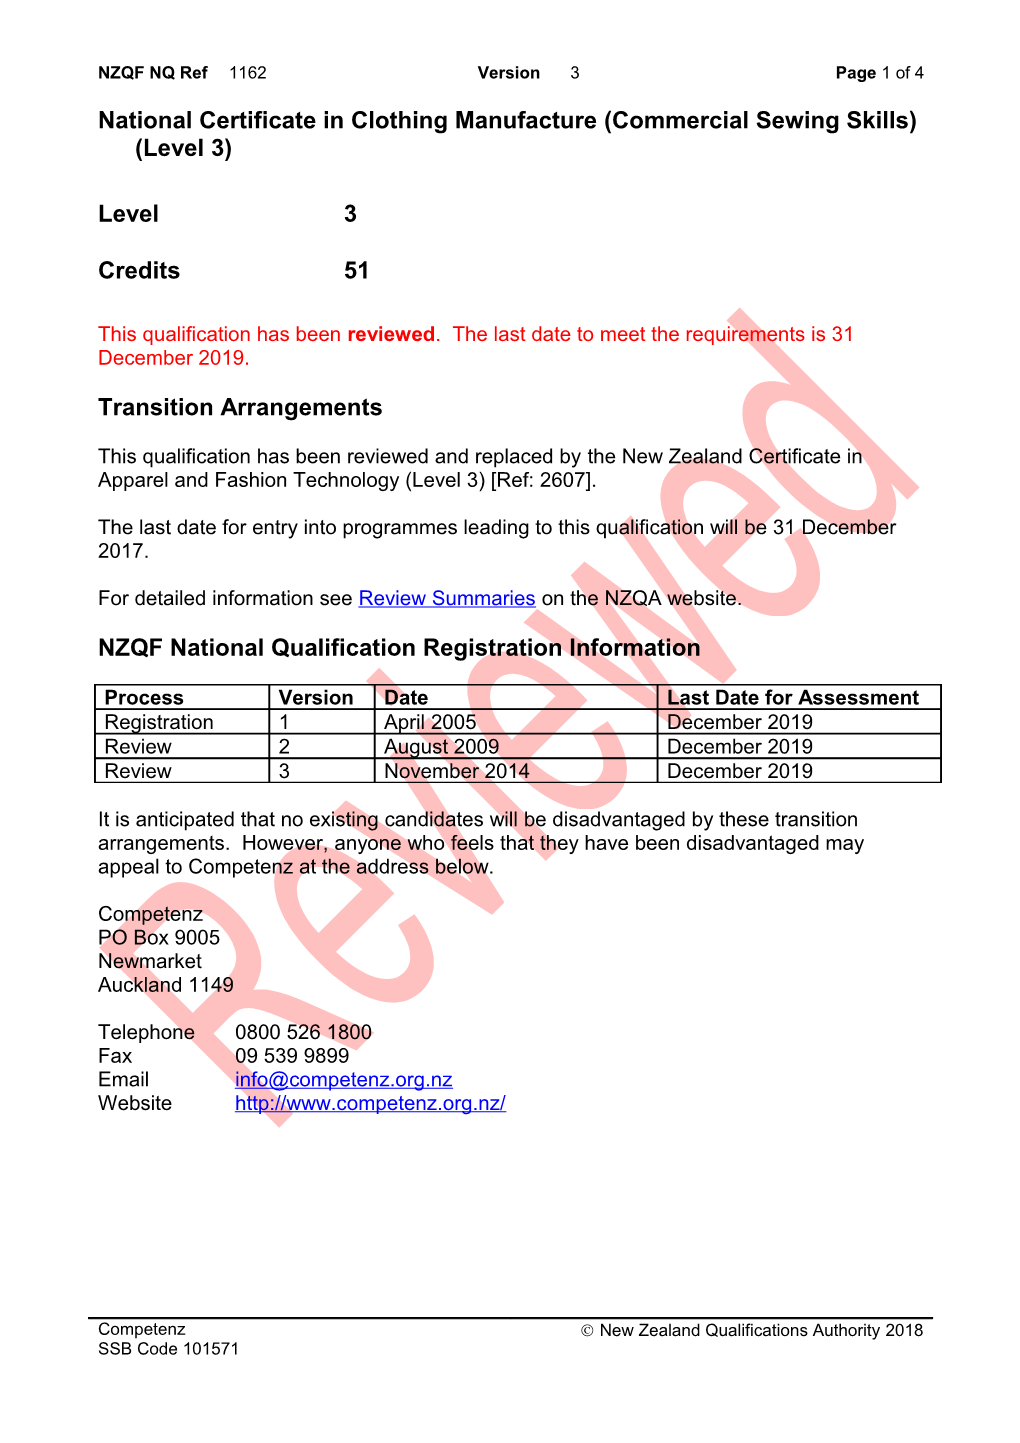 1162 National Certificate in Clothing Manufacture (Commercial Sewing Skills) (Level 3)